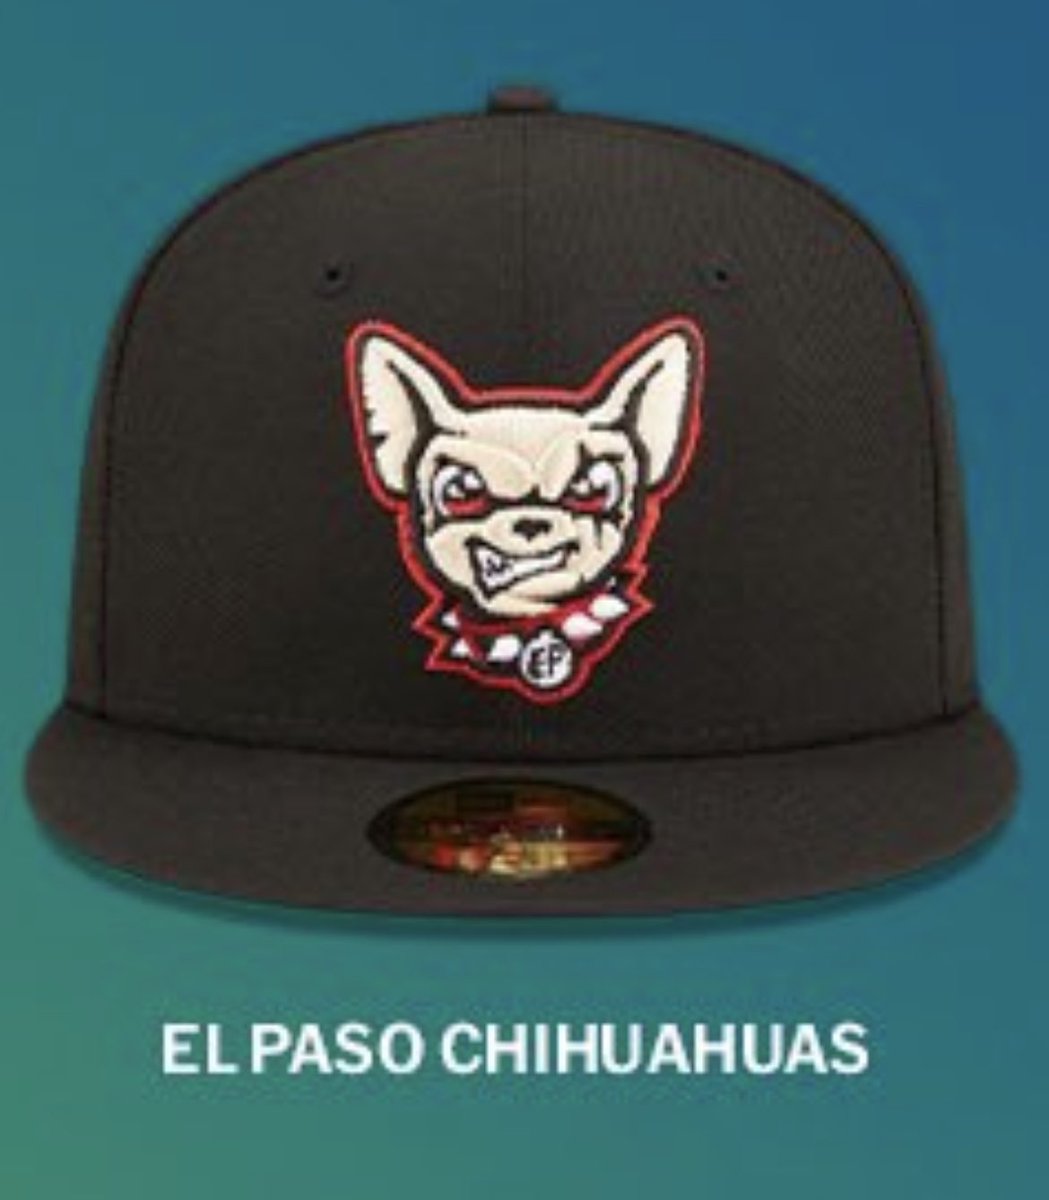 Best in the PCL #FearTheEars